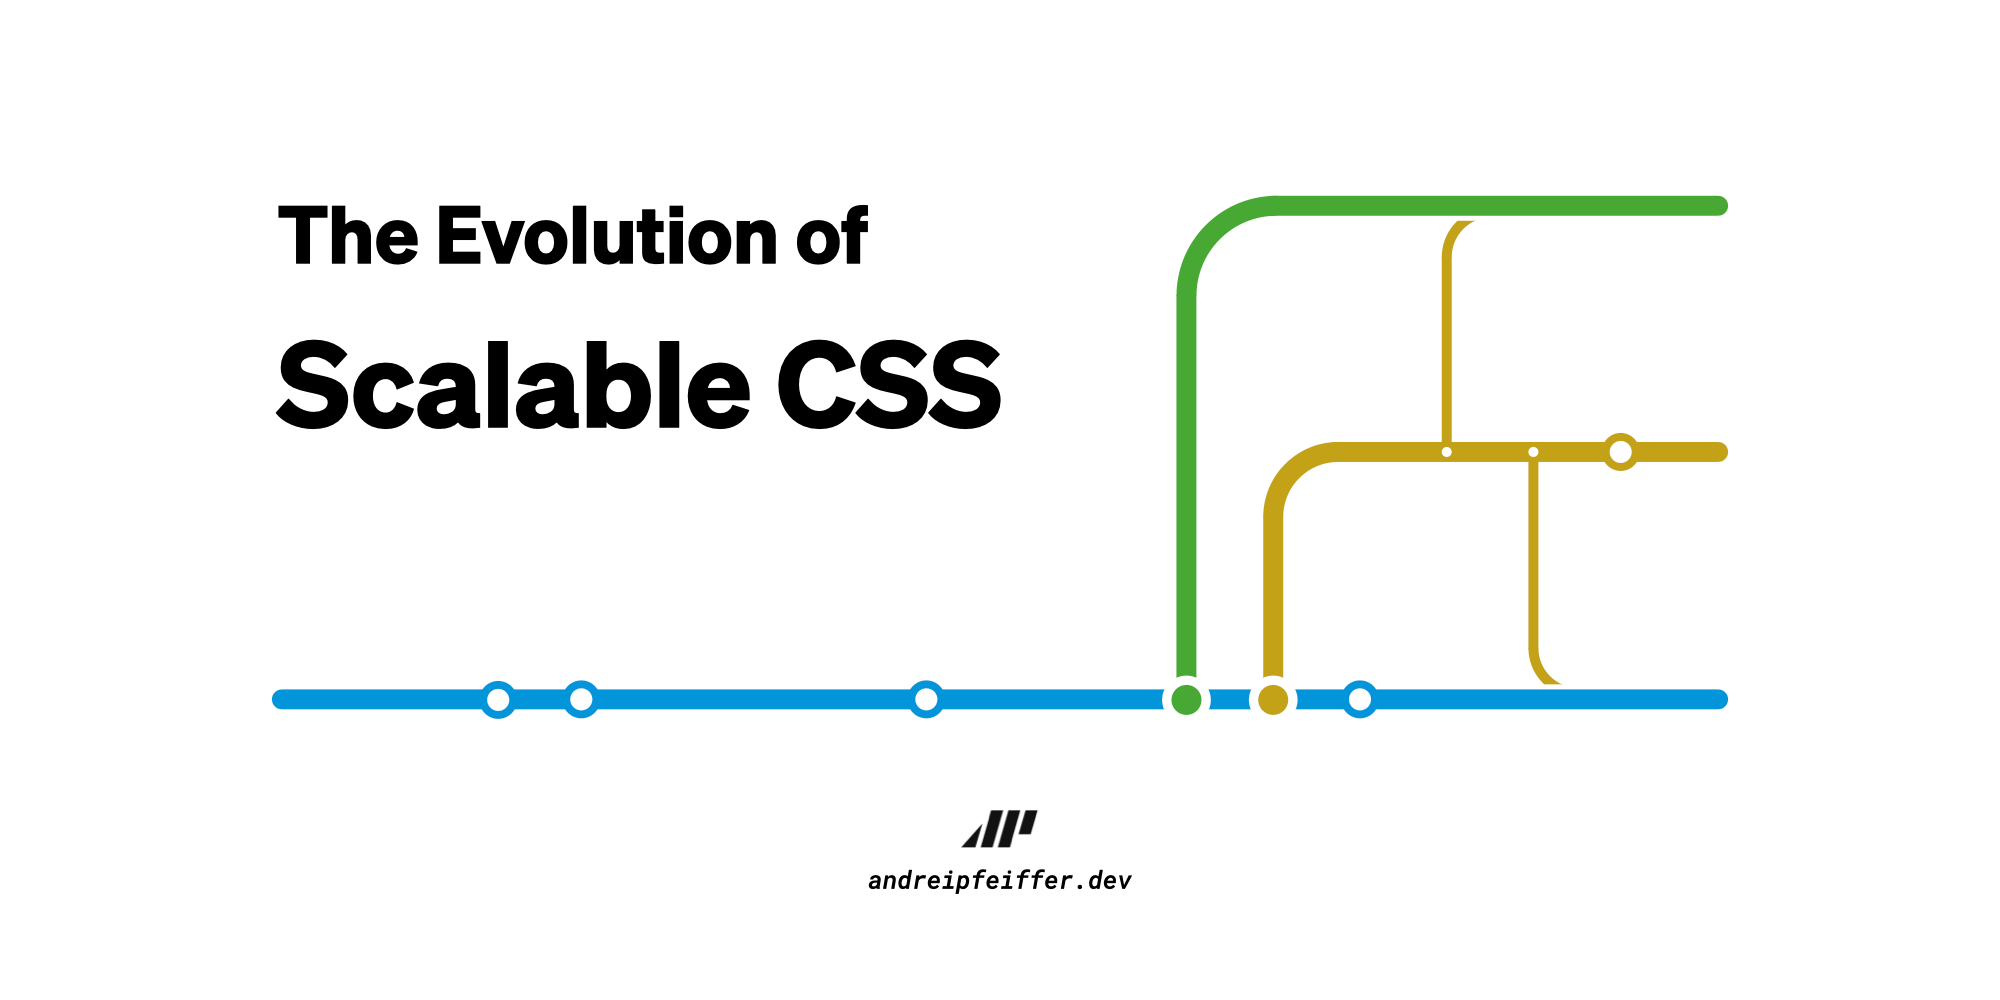 The evolution of scalable CSS is a multi-part chronicle intended to document the progress of tools, practices and techniques that enable us to write m